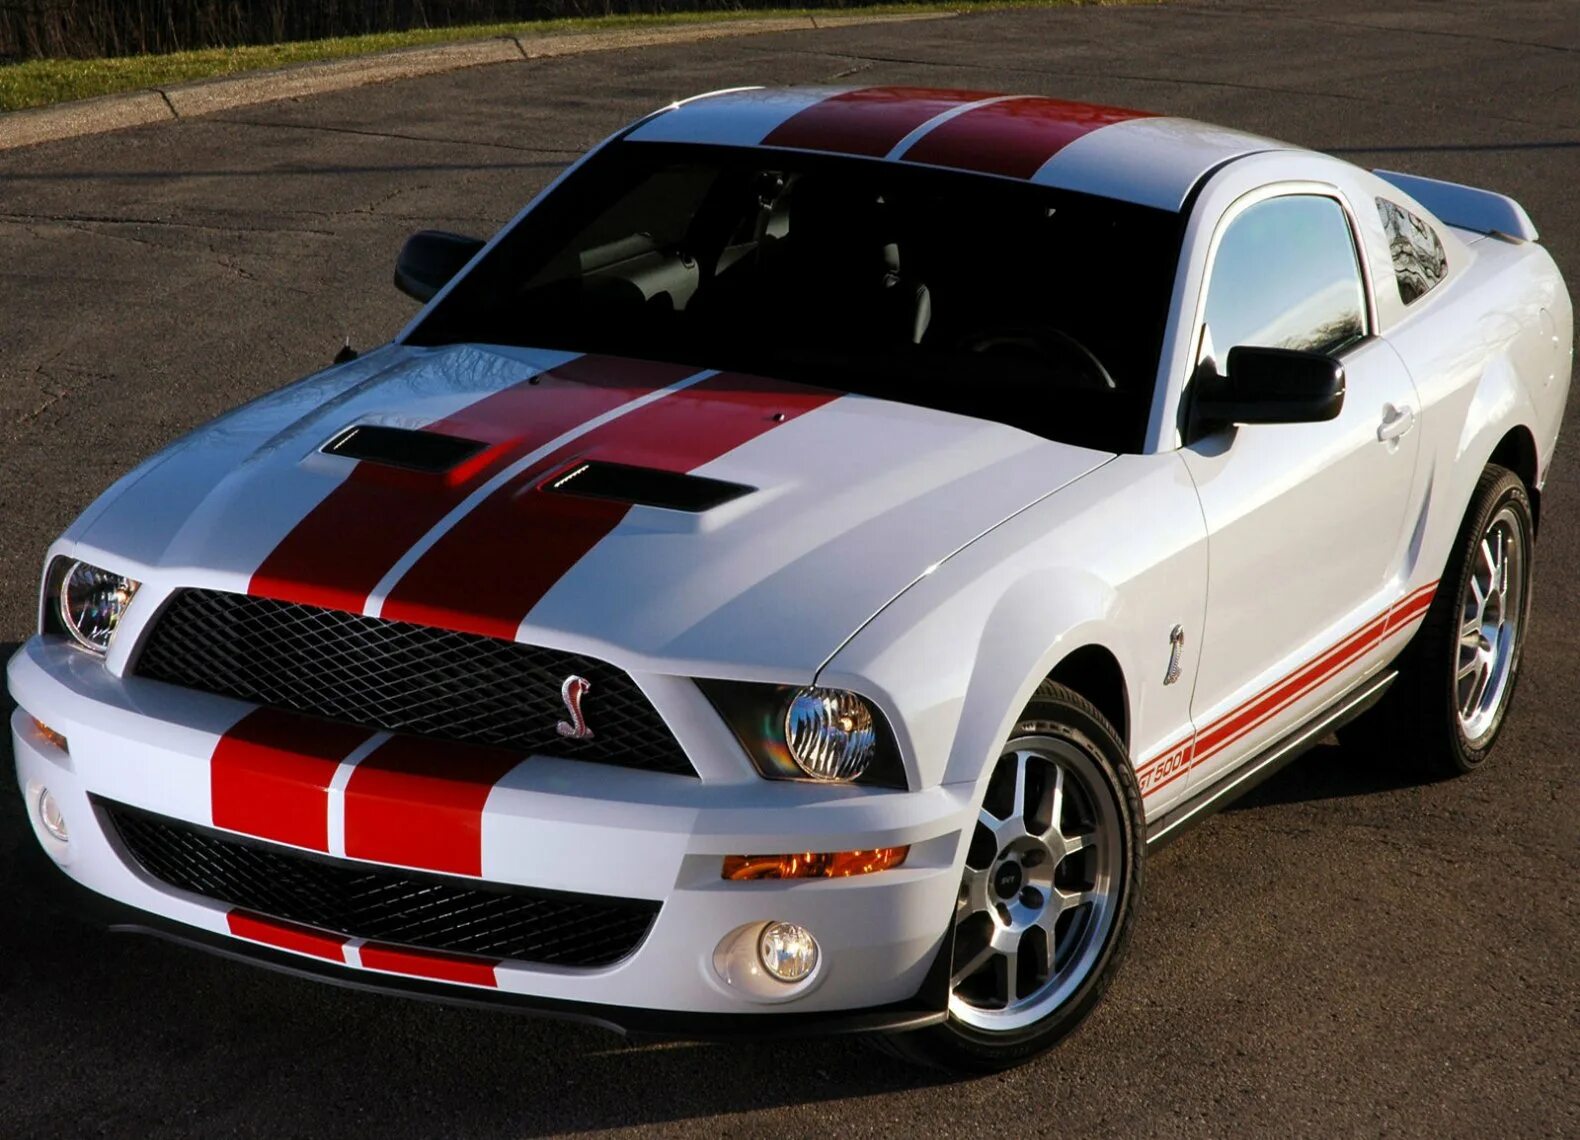 Мустанг объем. Форд Мустанг gt 500 Shelby. Ford Shelby gt500. Mustang Shelby gt500. Ford Mustang gt500.